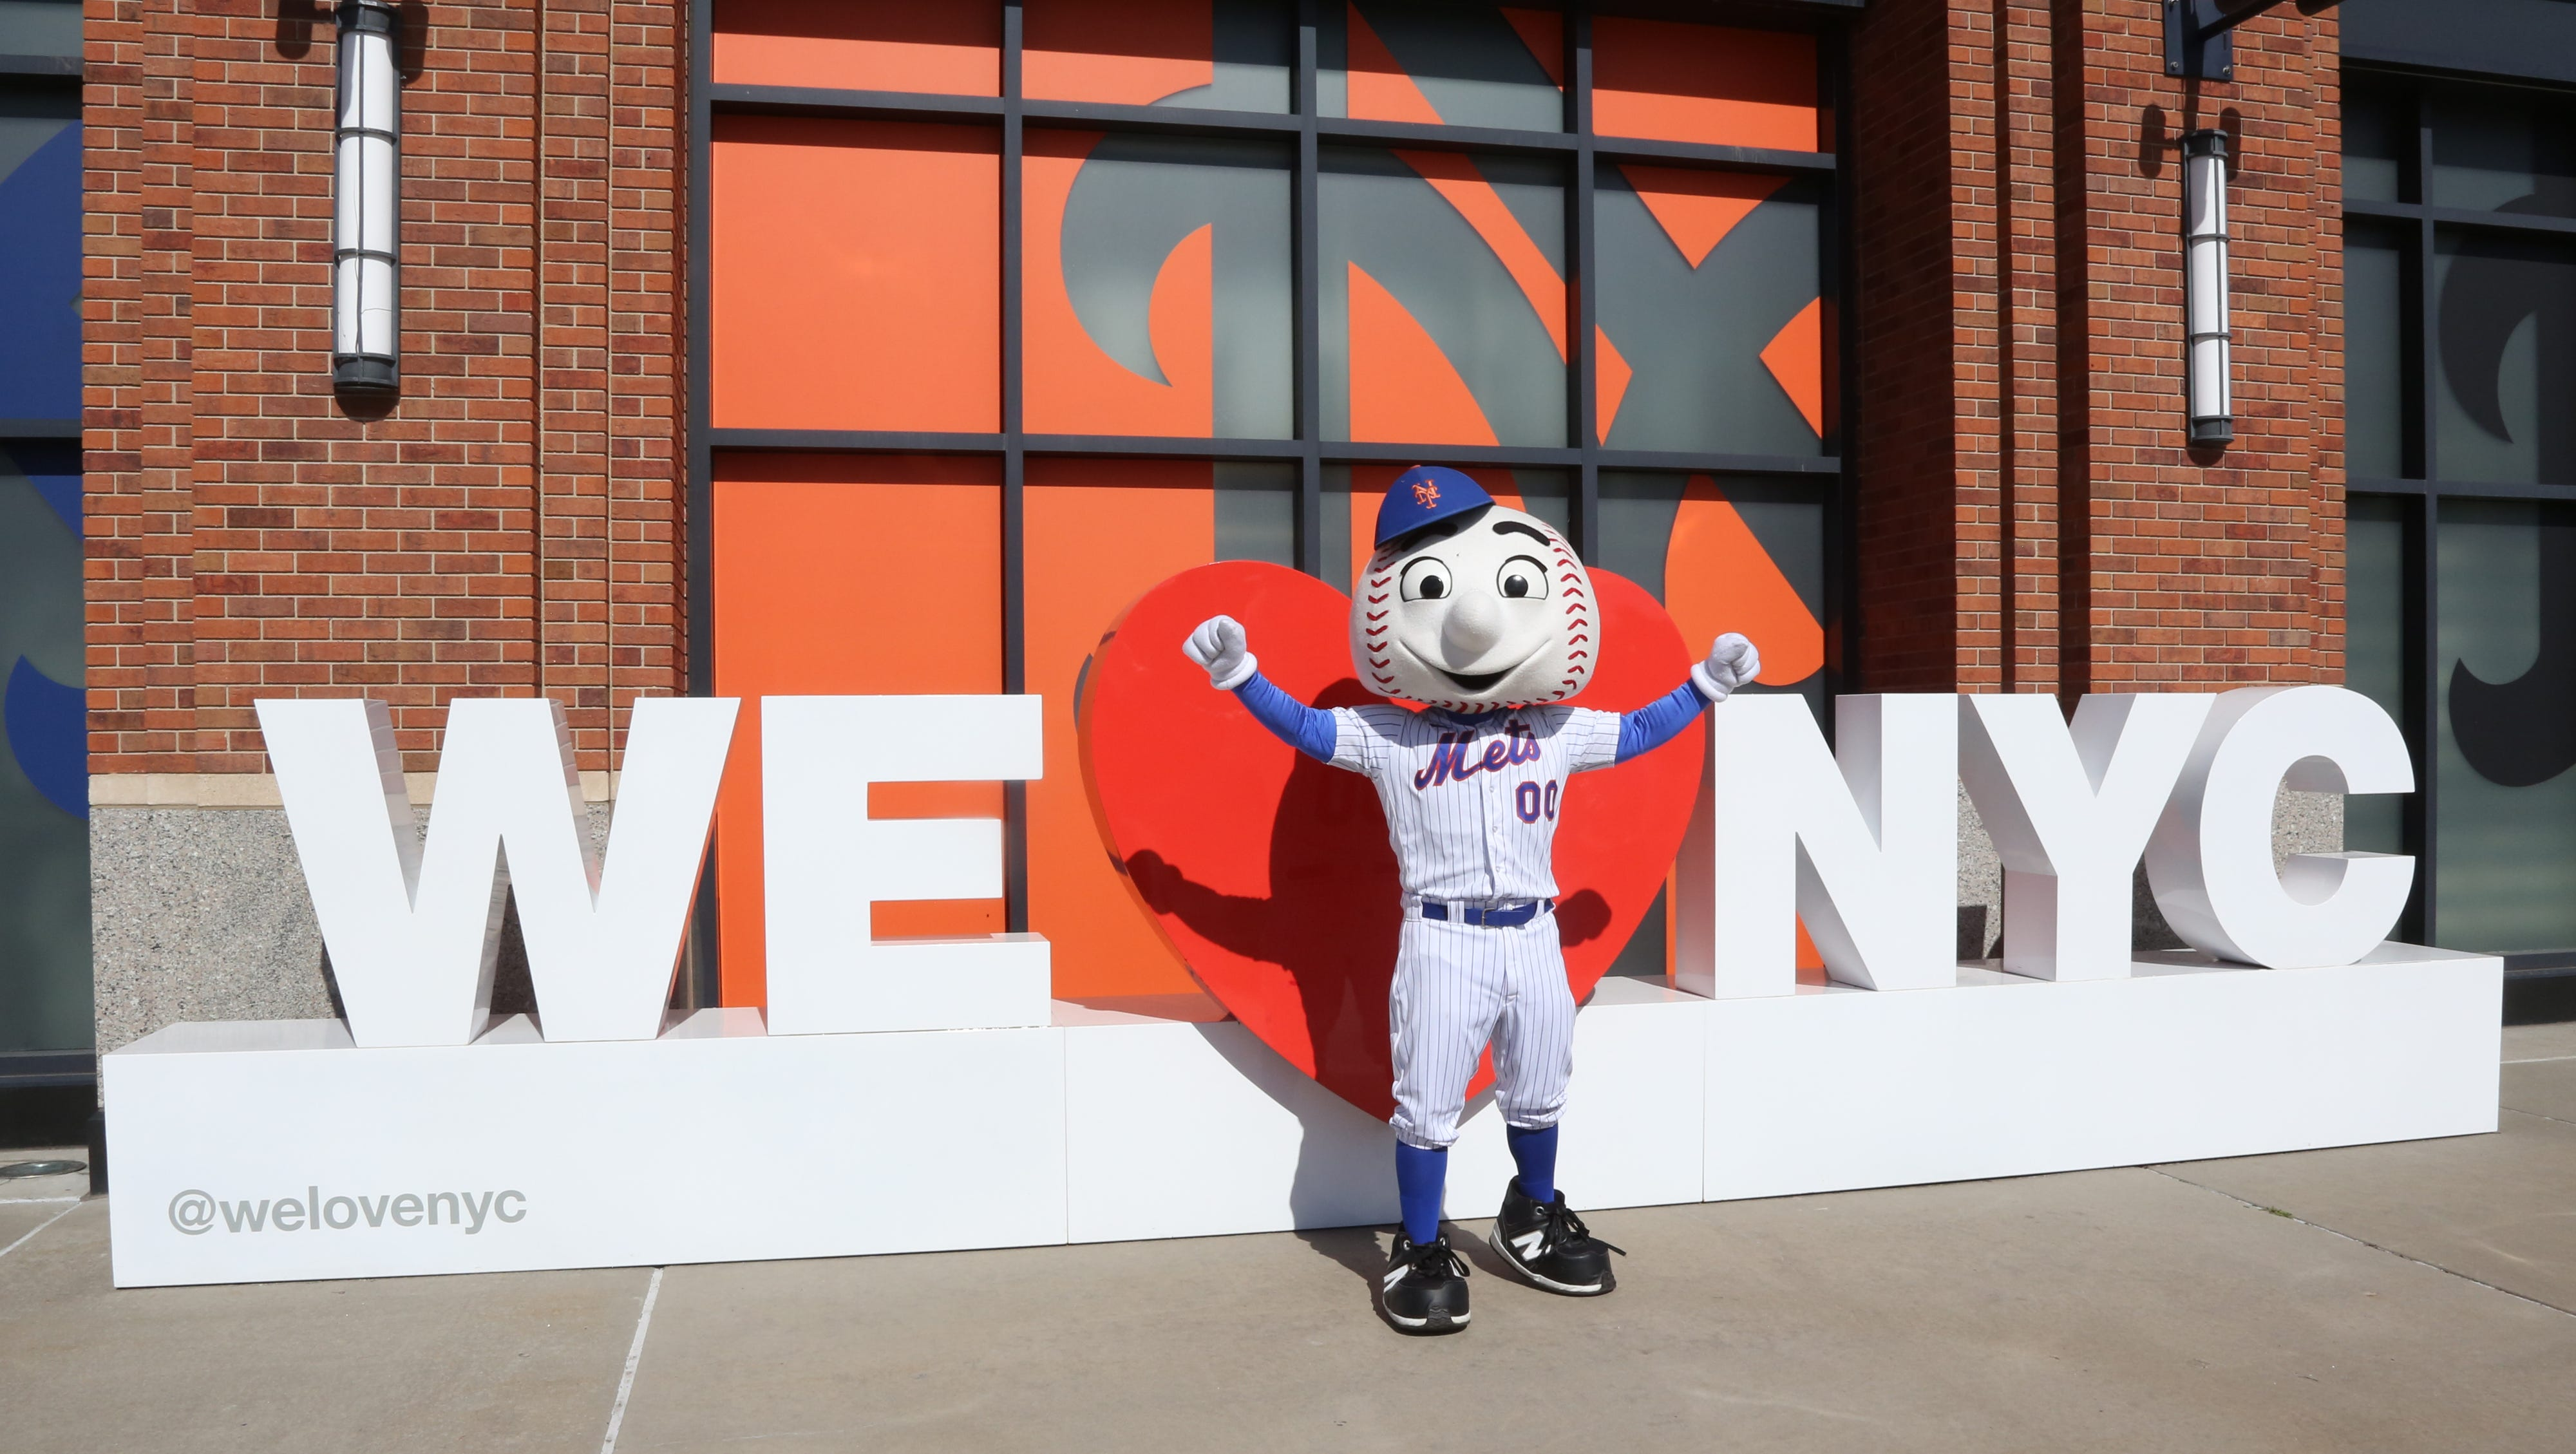 Today is the Mets season opener at Citi Field!